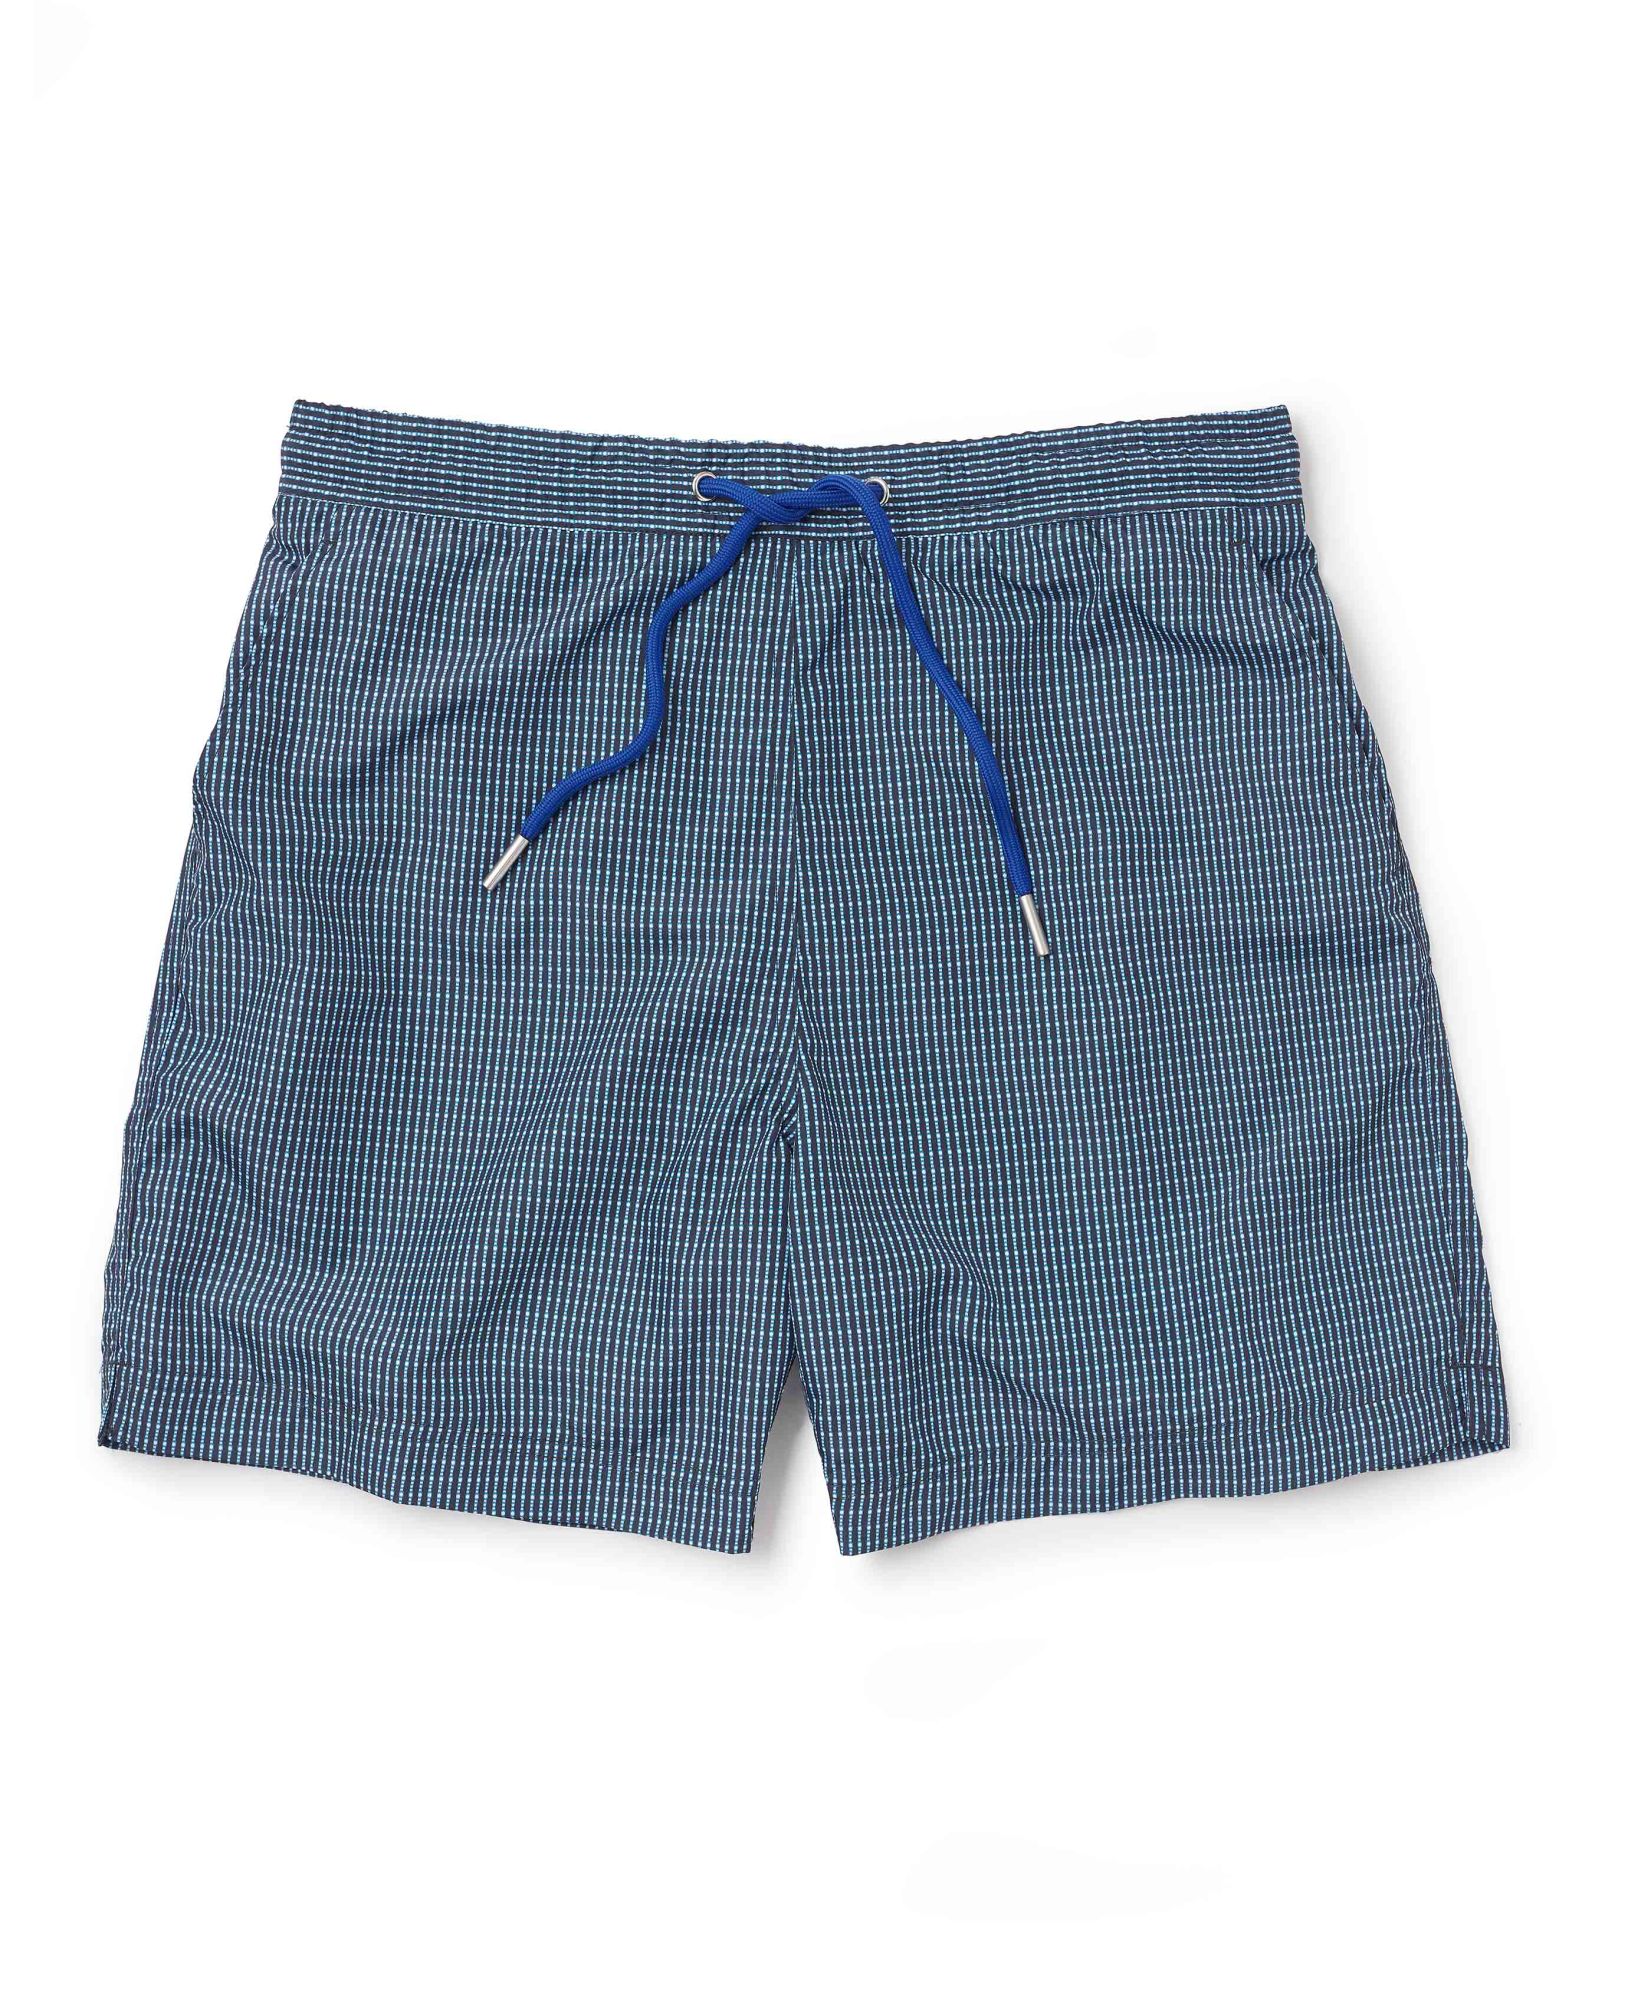 Blue Dotted Stripe Recycled Swim Shorts XL